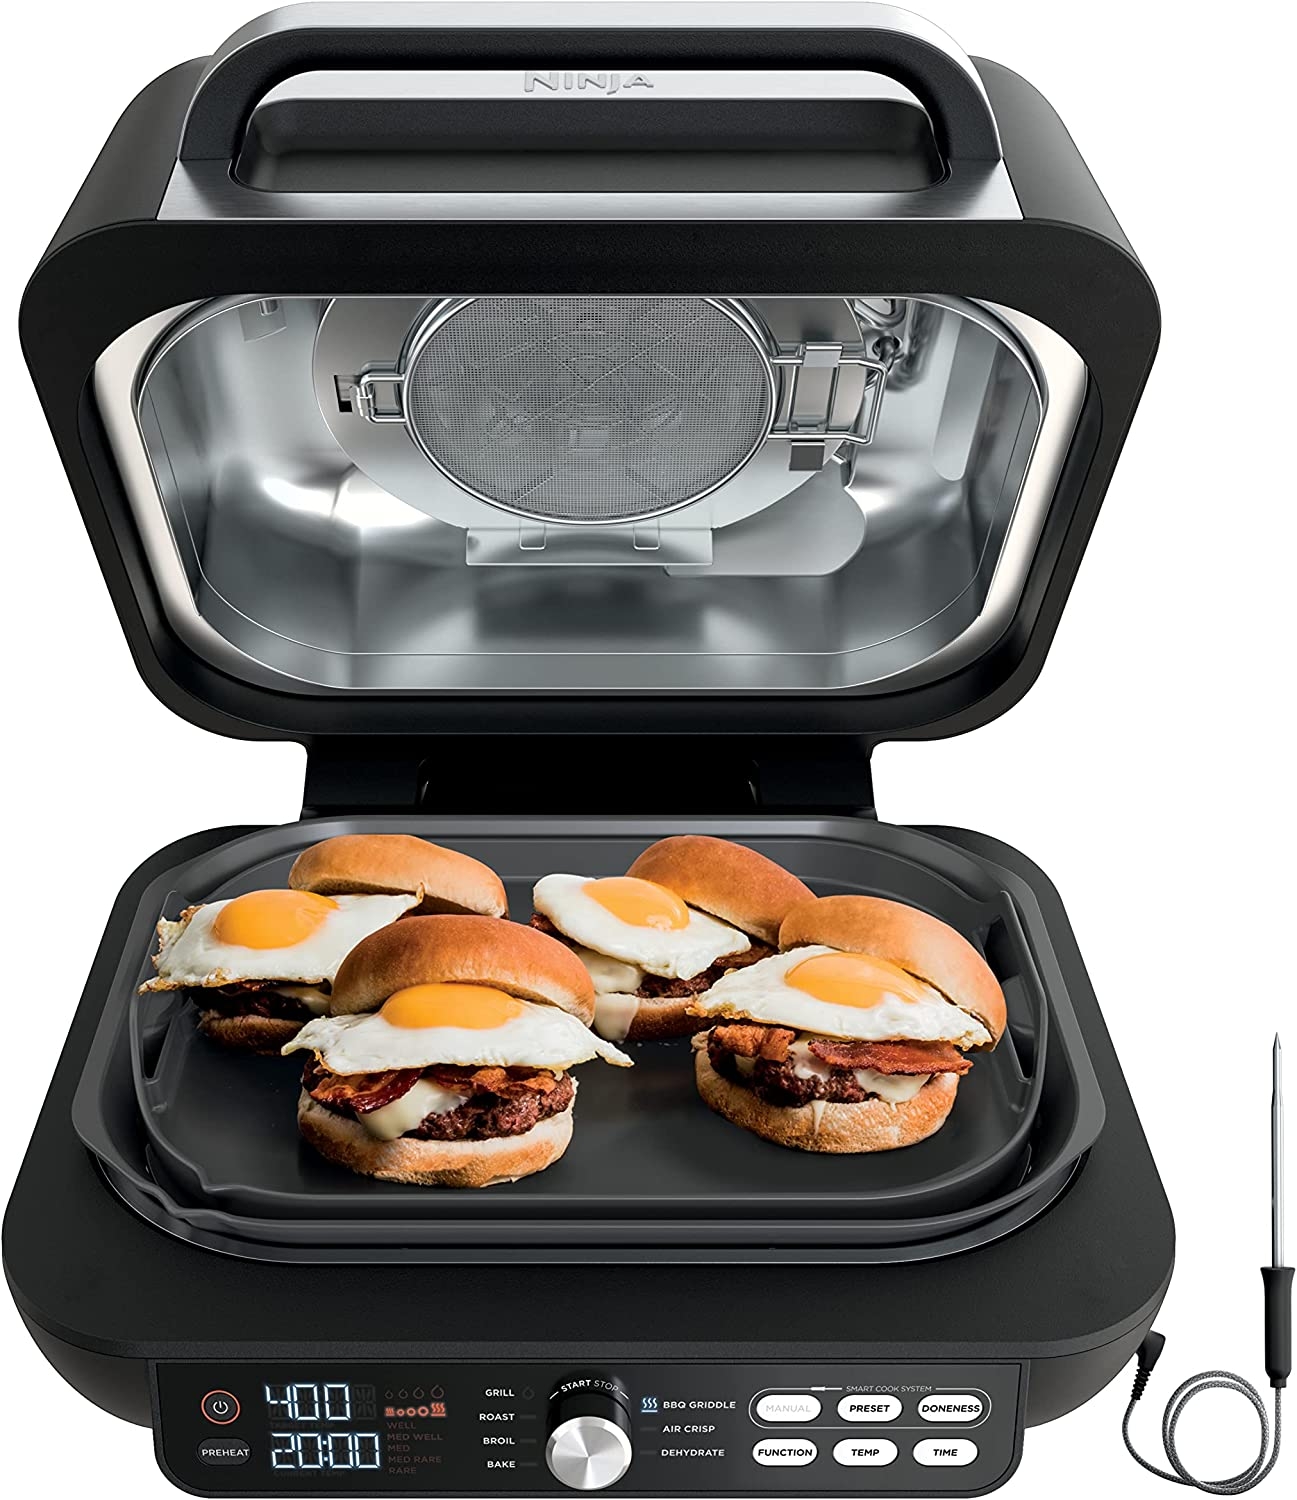 Ninja IG651 Foodi Smart XL Pro 7-in-1 Indoor Grill/Griddle Combo, use Opened or Closed, with Griddle, Air Fry, Dehydrate & More,